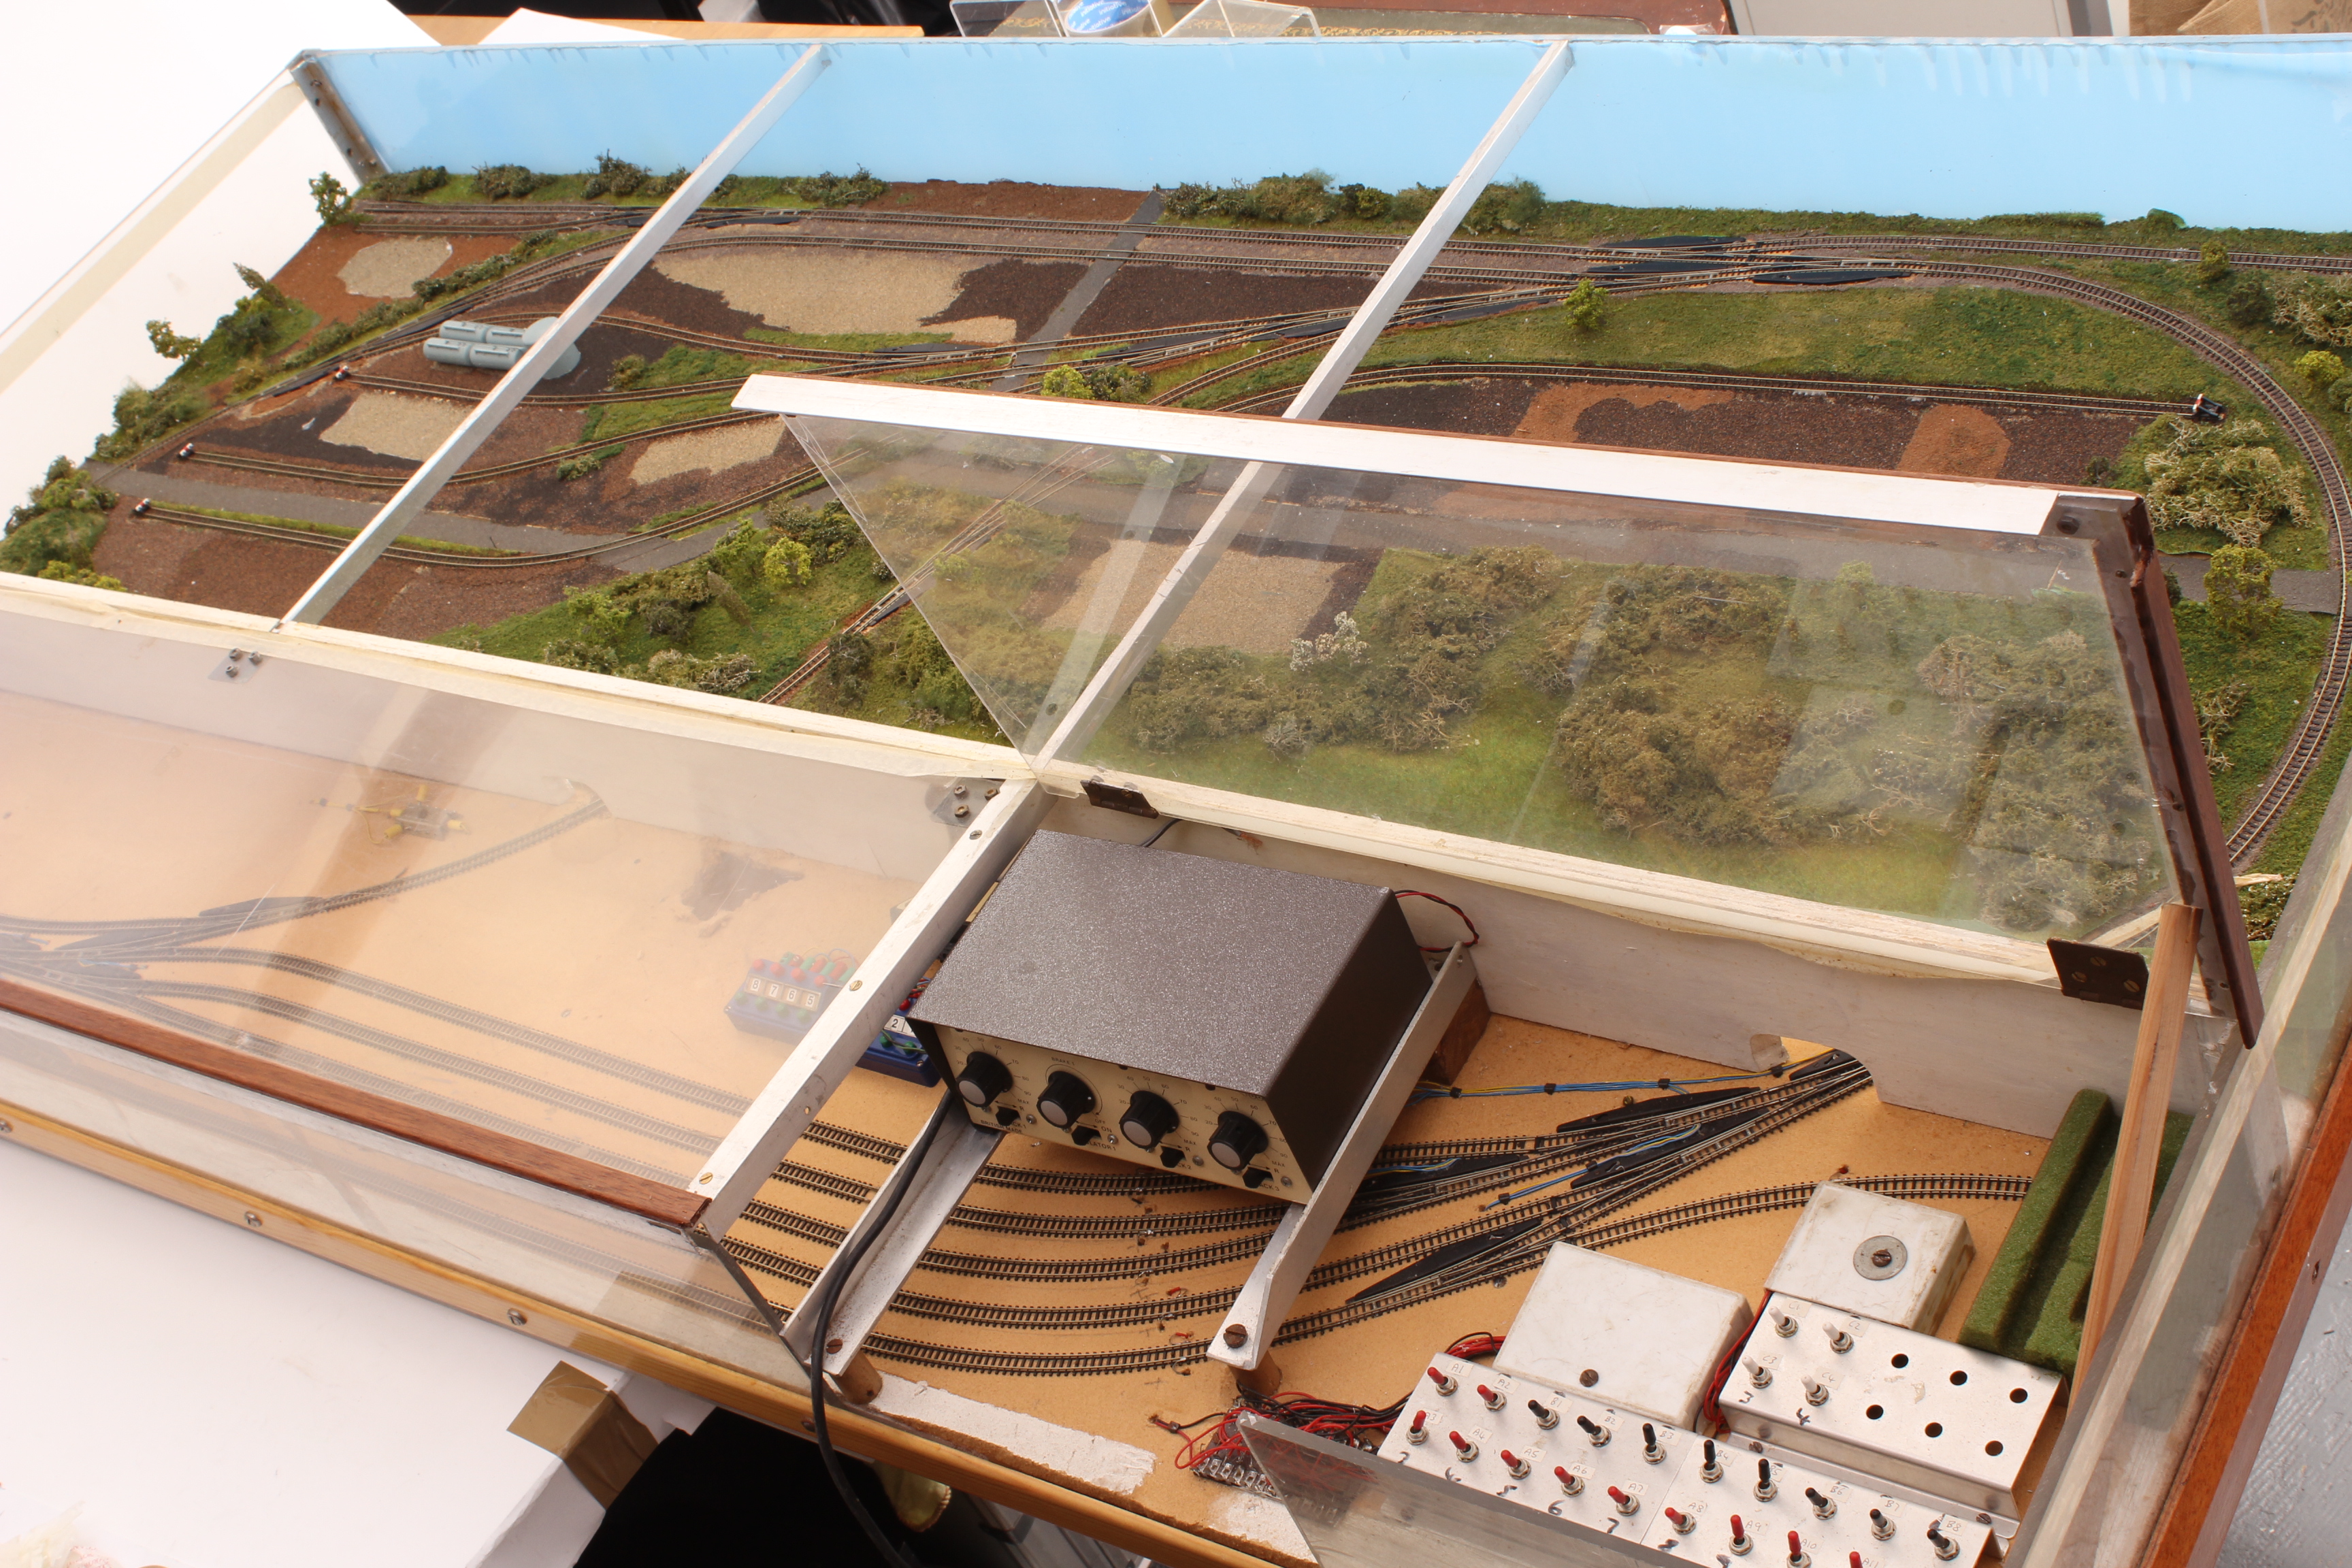 A Z Gauge scratch built Model Railway Layout, built with clear plastic lift up lid with two